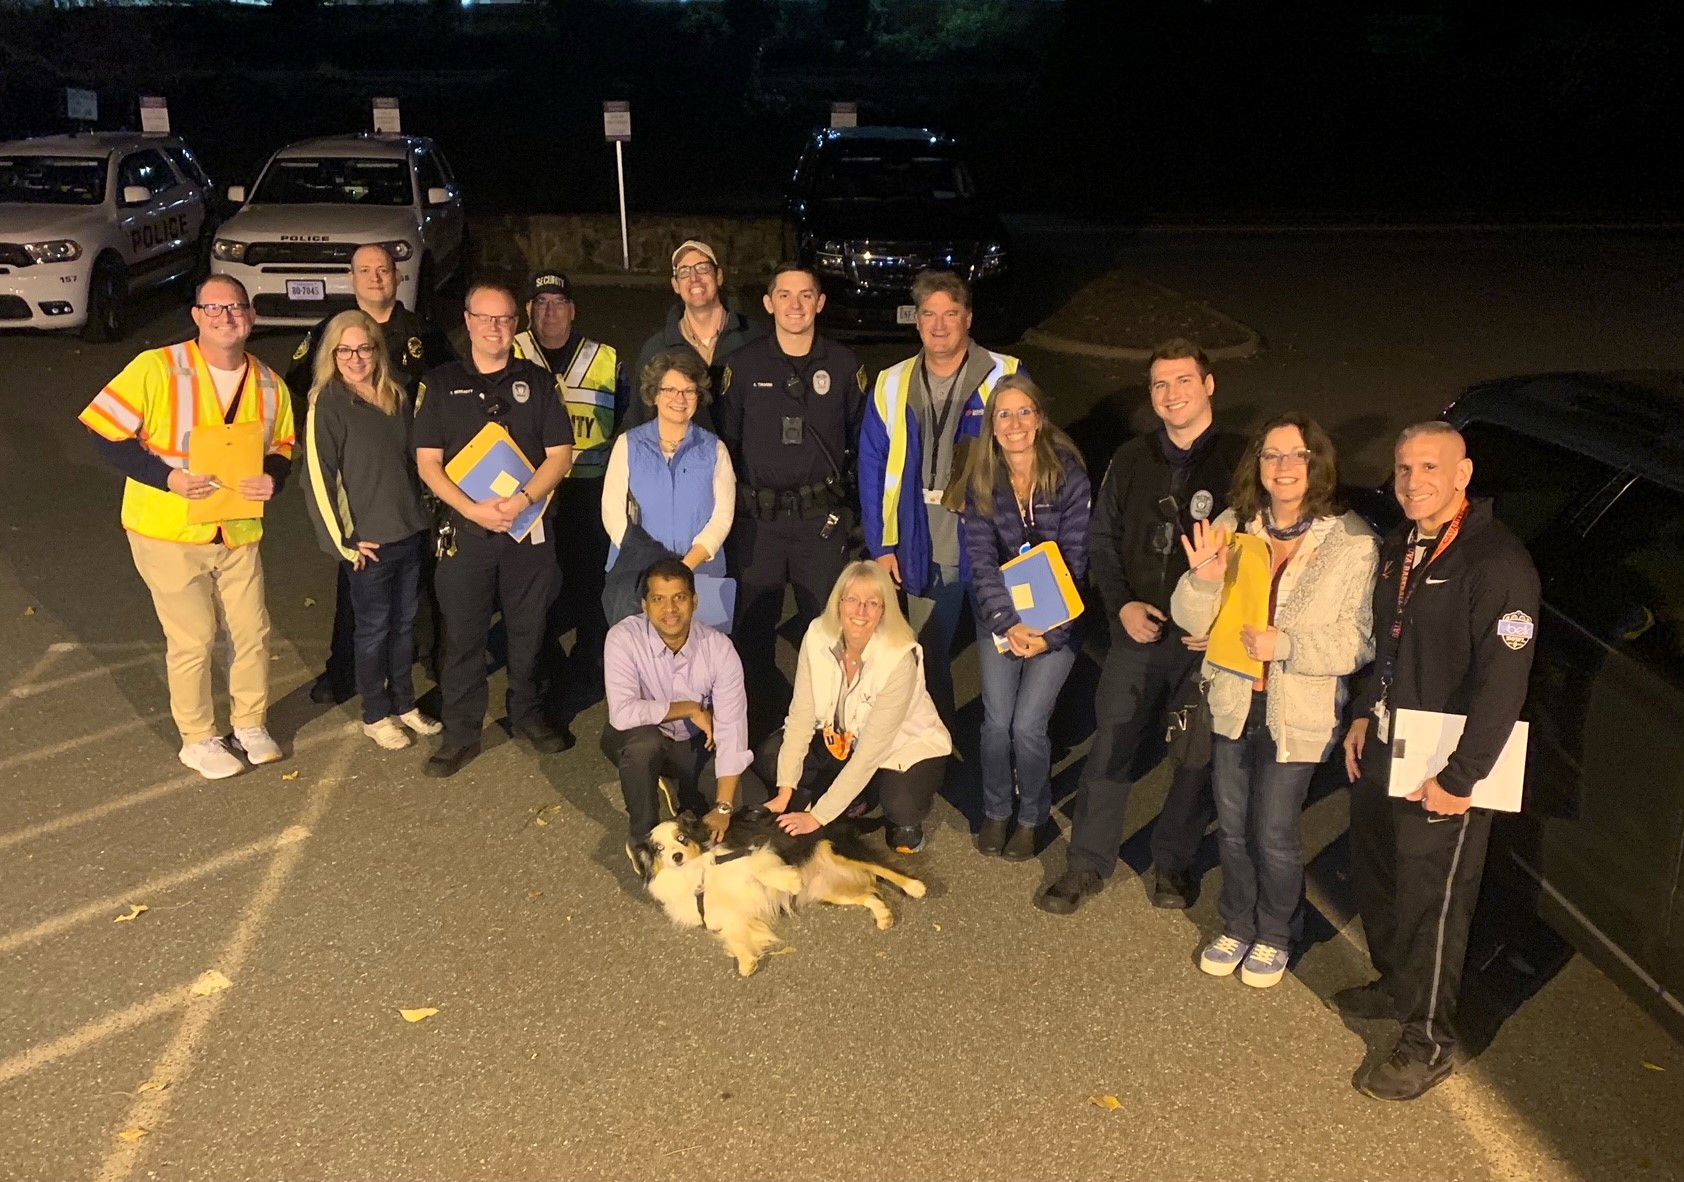 Staff from the Department of Safety and Security, inclding K-9 Cooper, gather for a safety night walk with faculty and staff colleagues